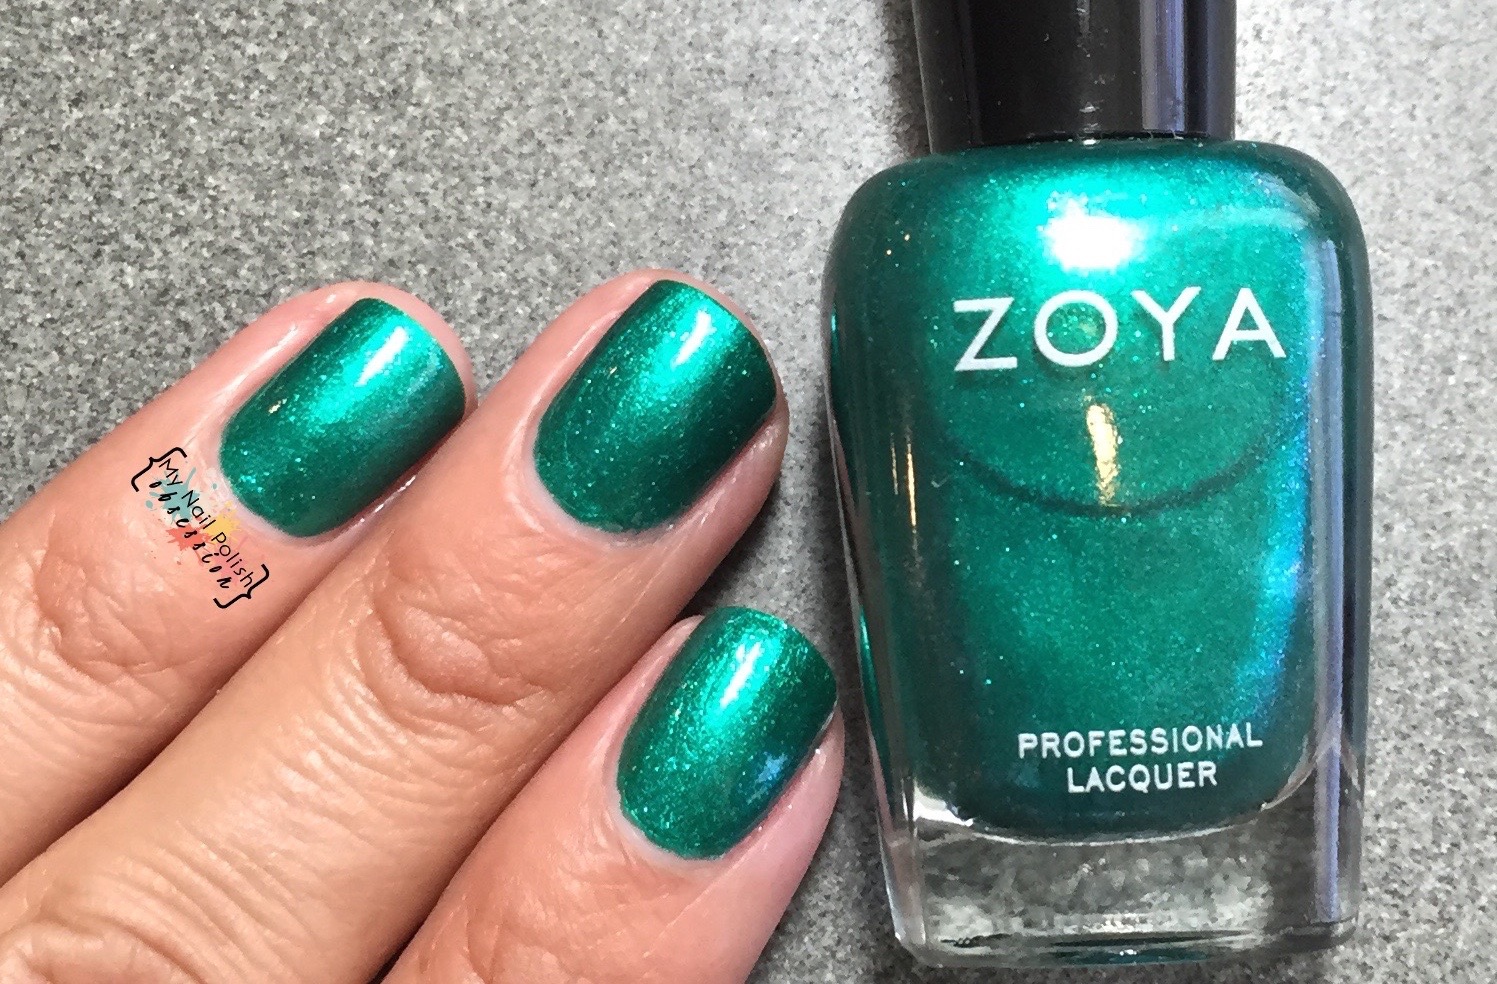 4. Zoya Professional Lacquer - wide 6